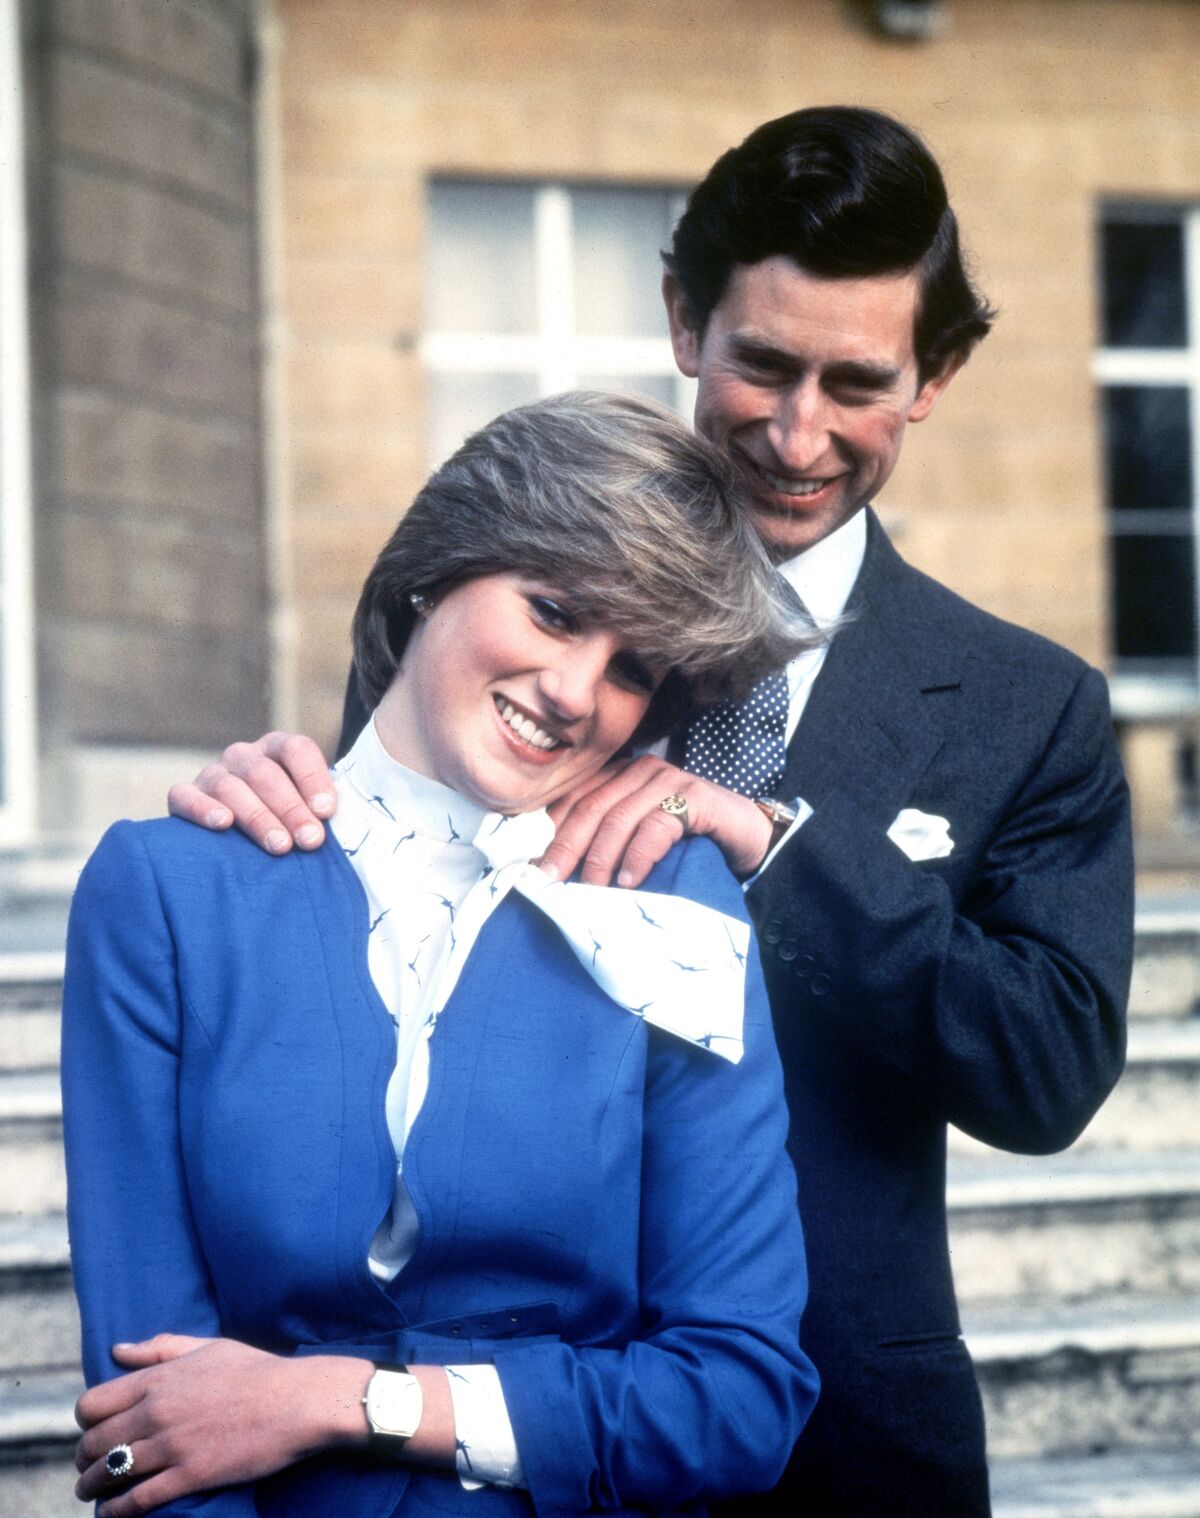  February 1981: Britain's Prince Charles and Lady Diana Spencer before the wedding. She wears a conservative blue jacket.